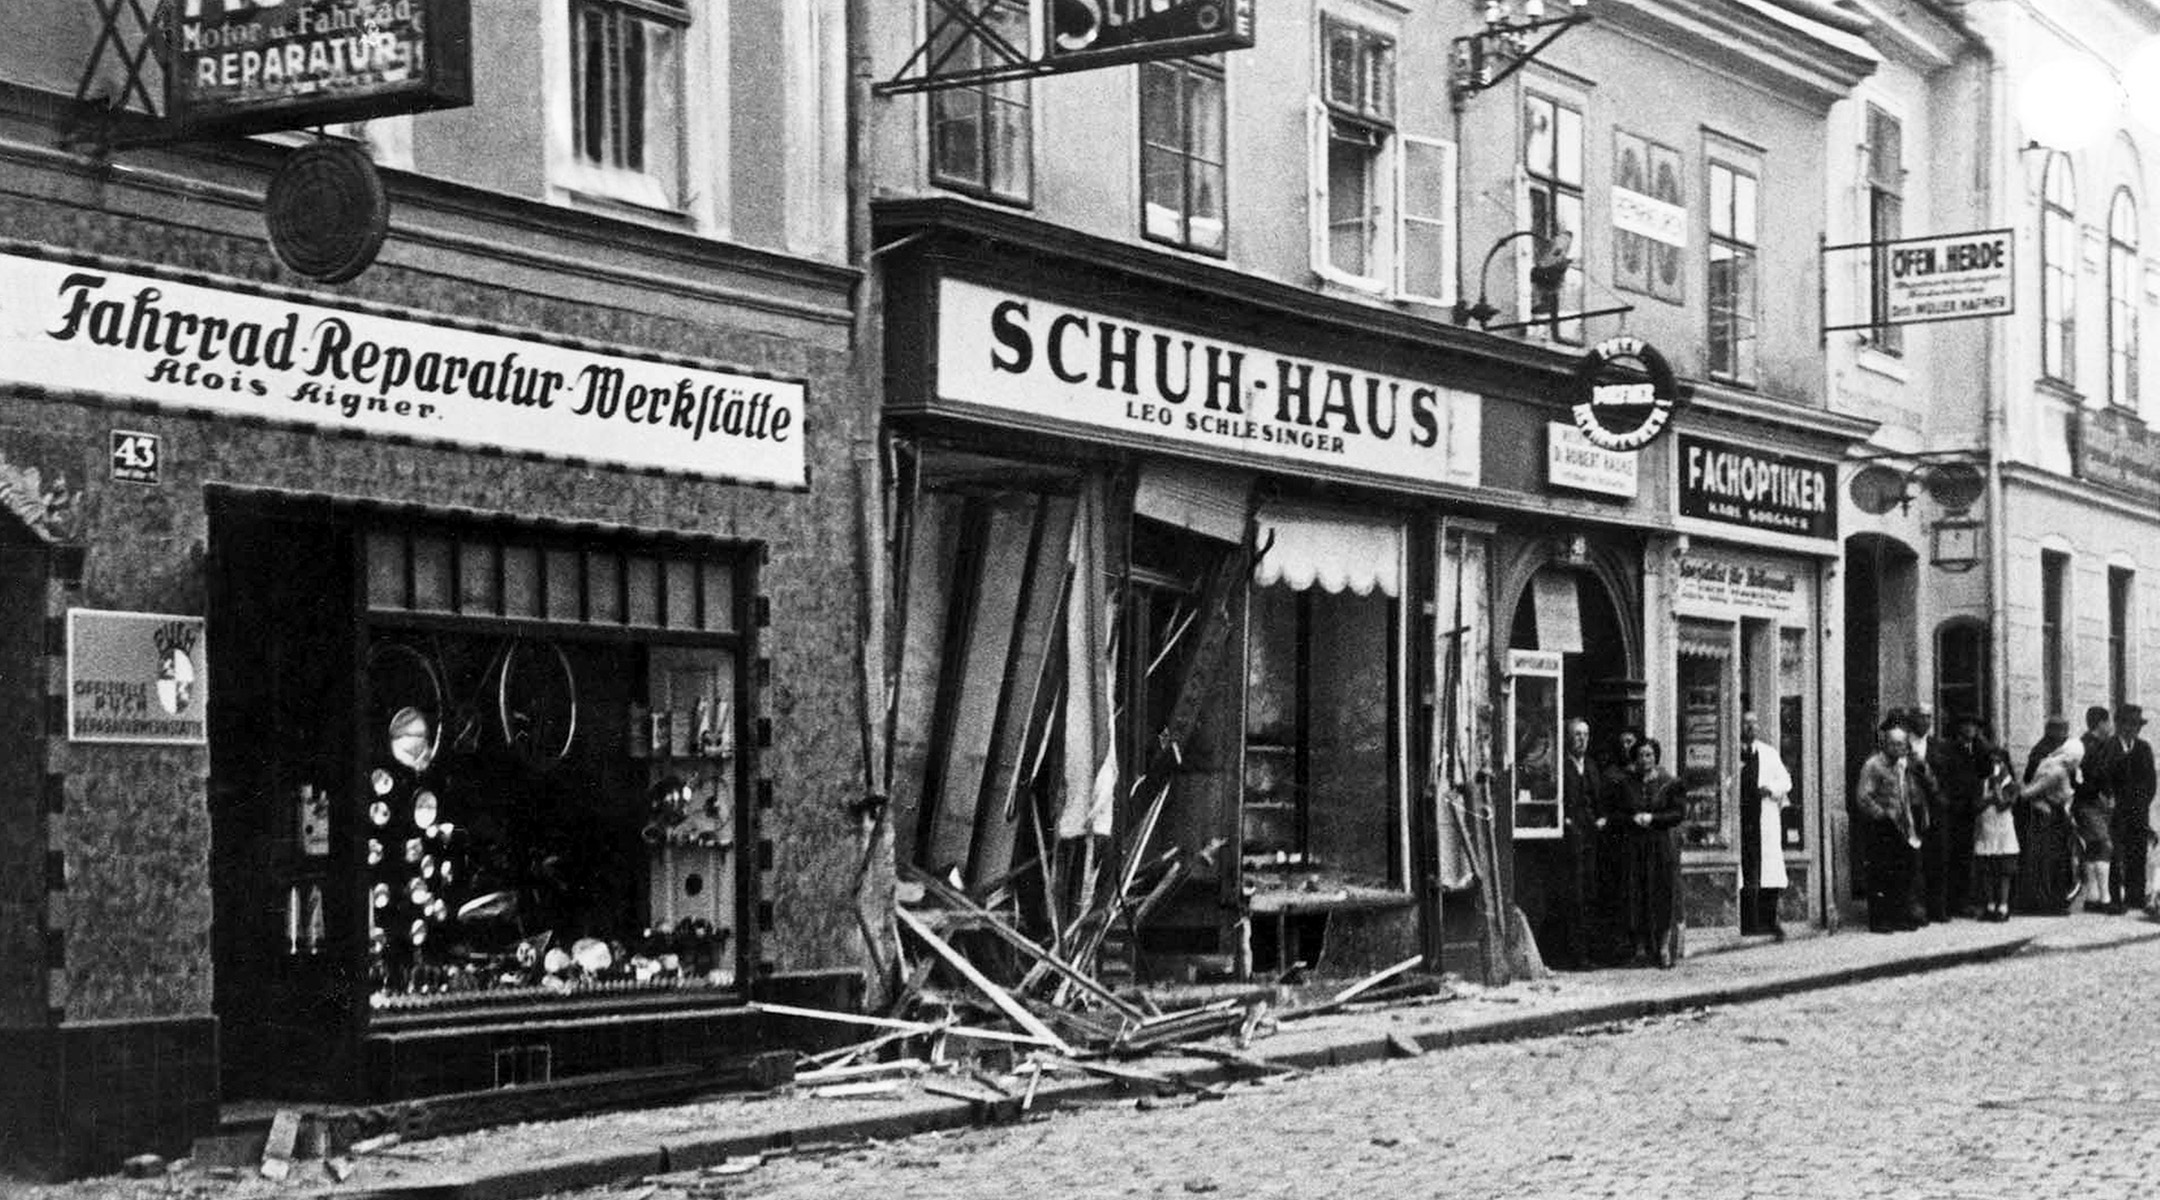 A view of a Jewish-owned shoe store that was destroyed by the Nazis on Kristallnacht in Vienna, Nov. 10, 1938. (History/Universal Images Group via Getty Images)